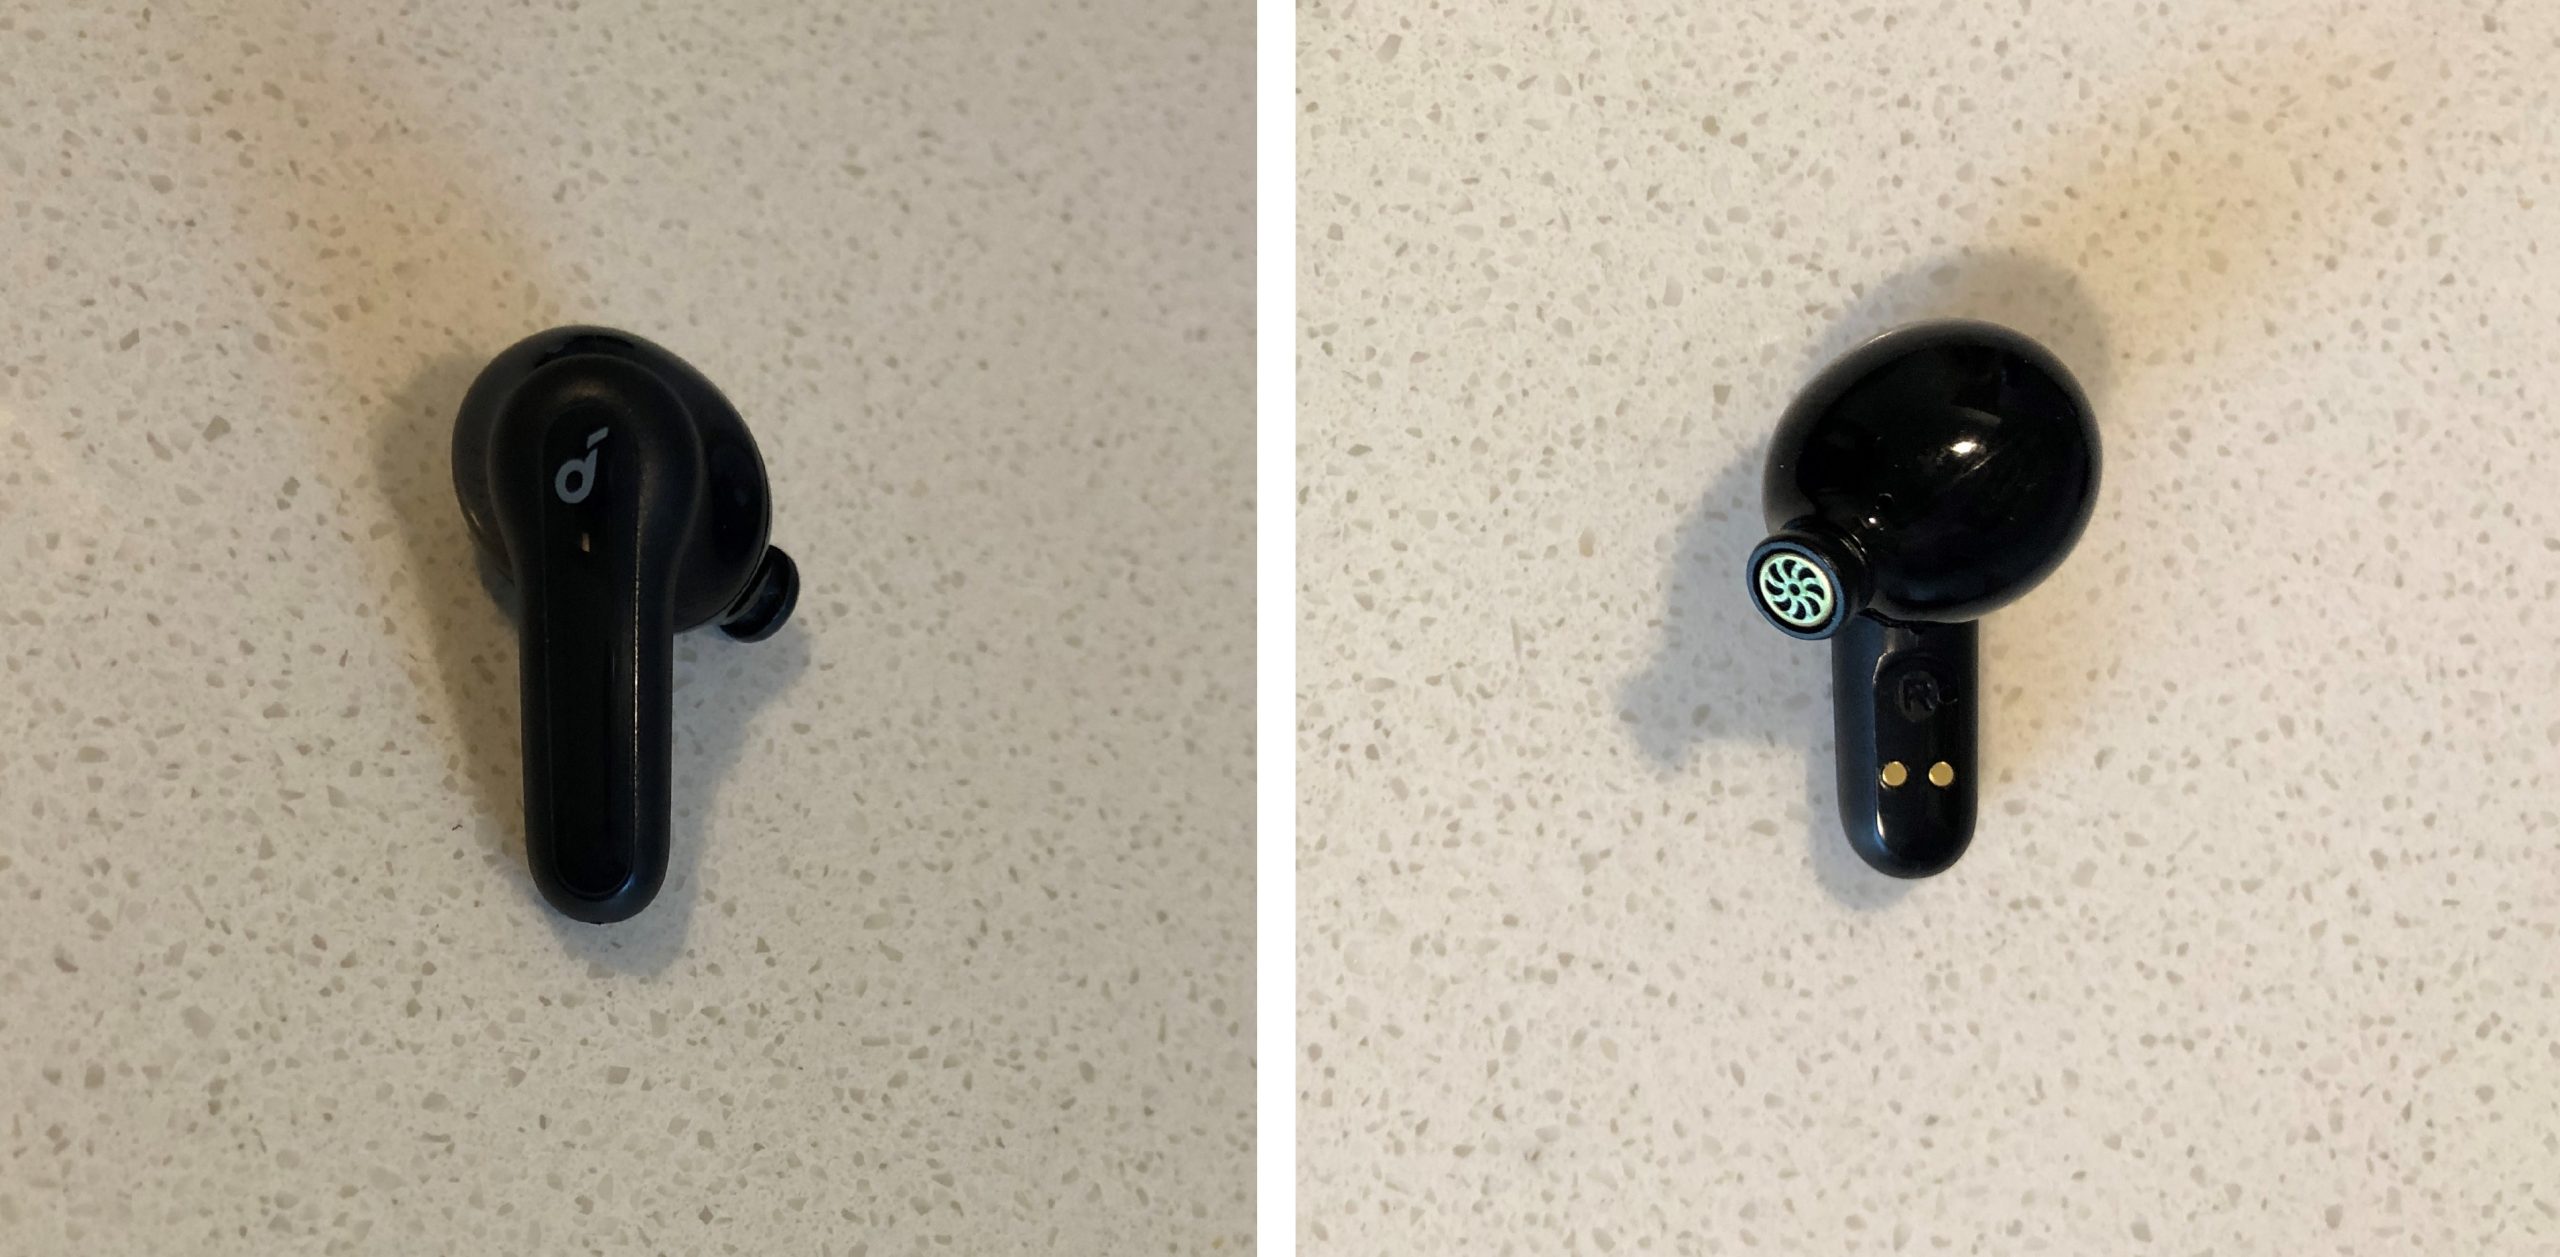 Soundcore Life P2 earbud back and front